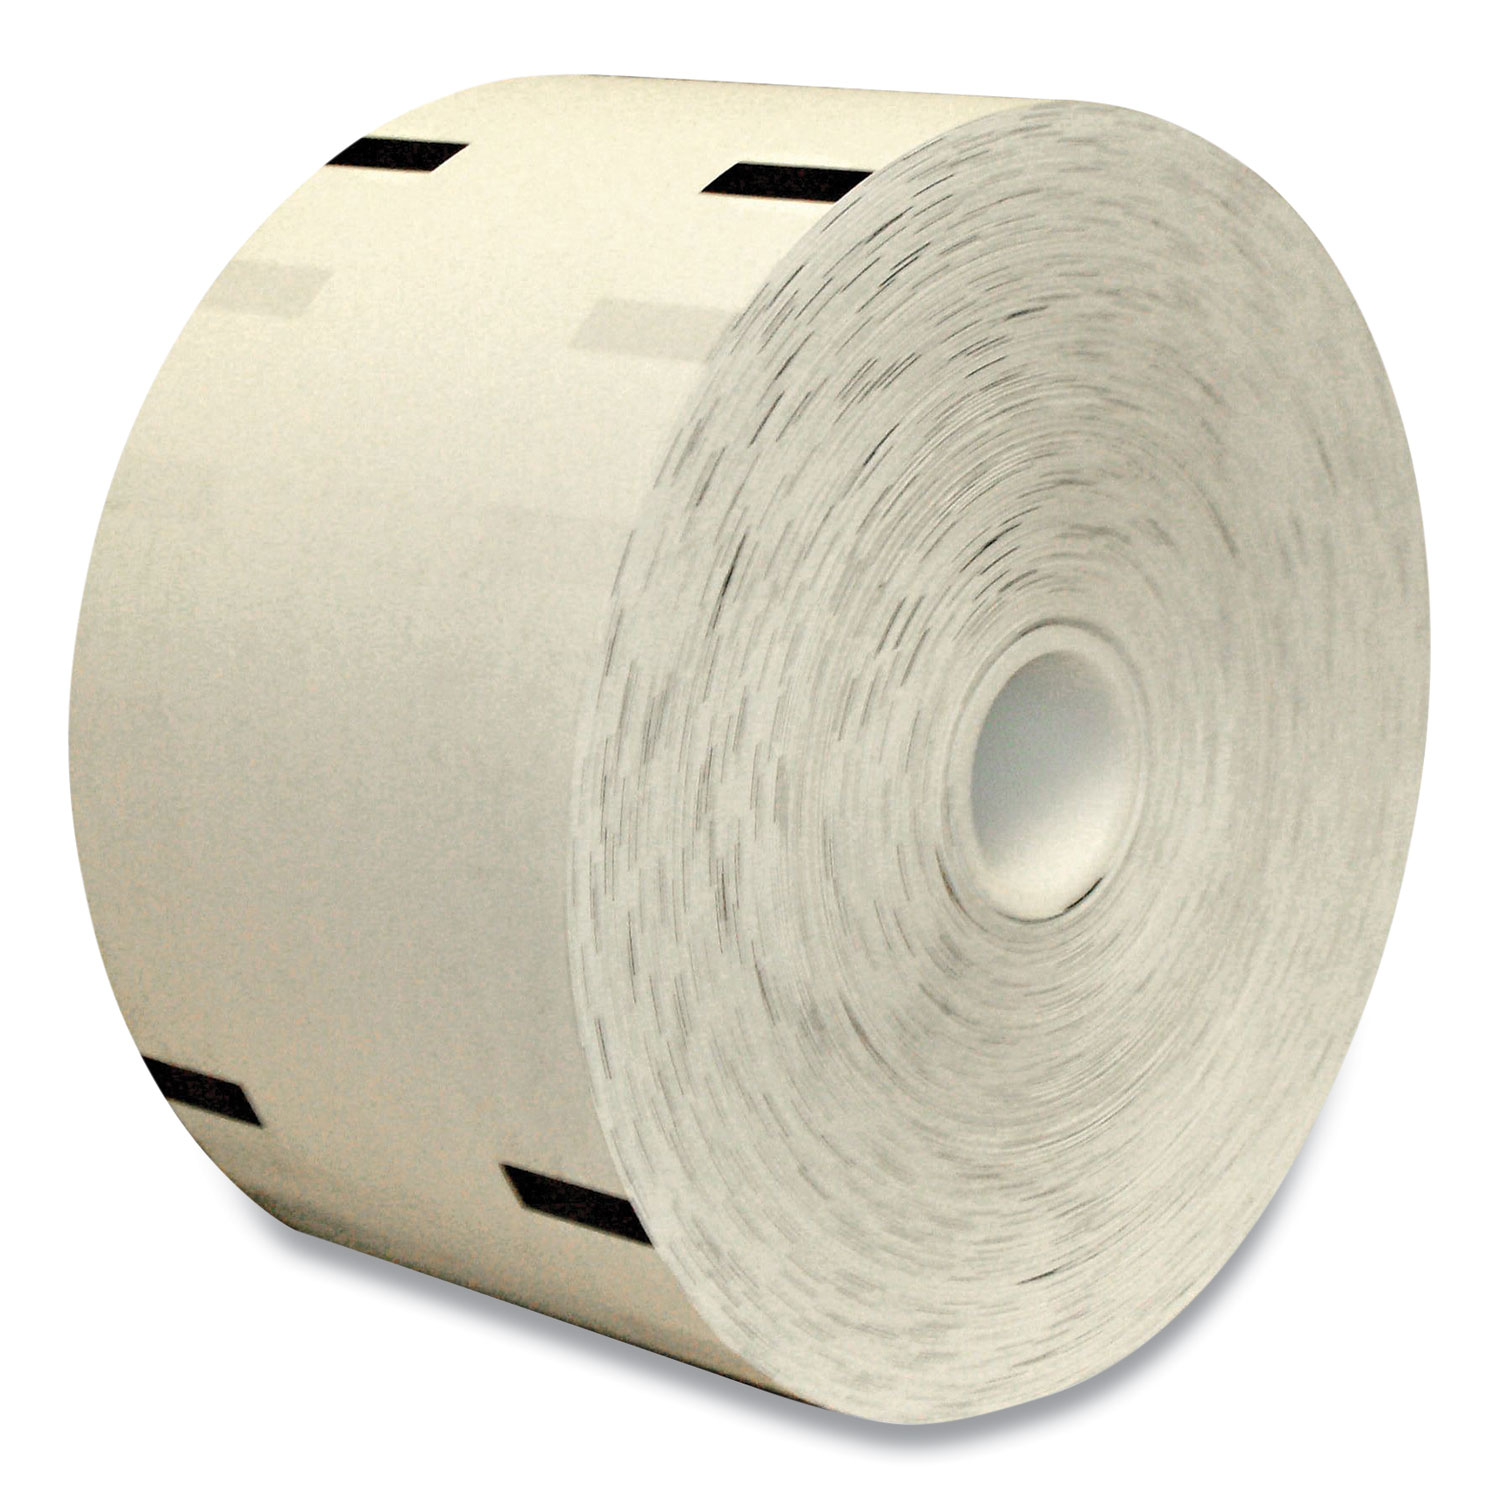 Control Papers Thermal ATM Receipt Roll, 3.12 x 1,000 ft, White, 4/Carton